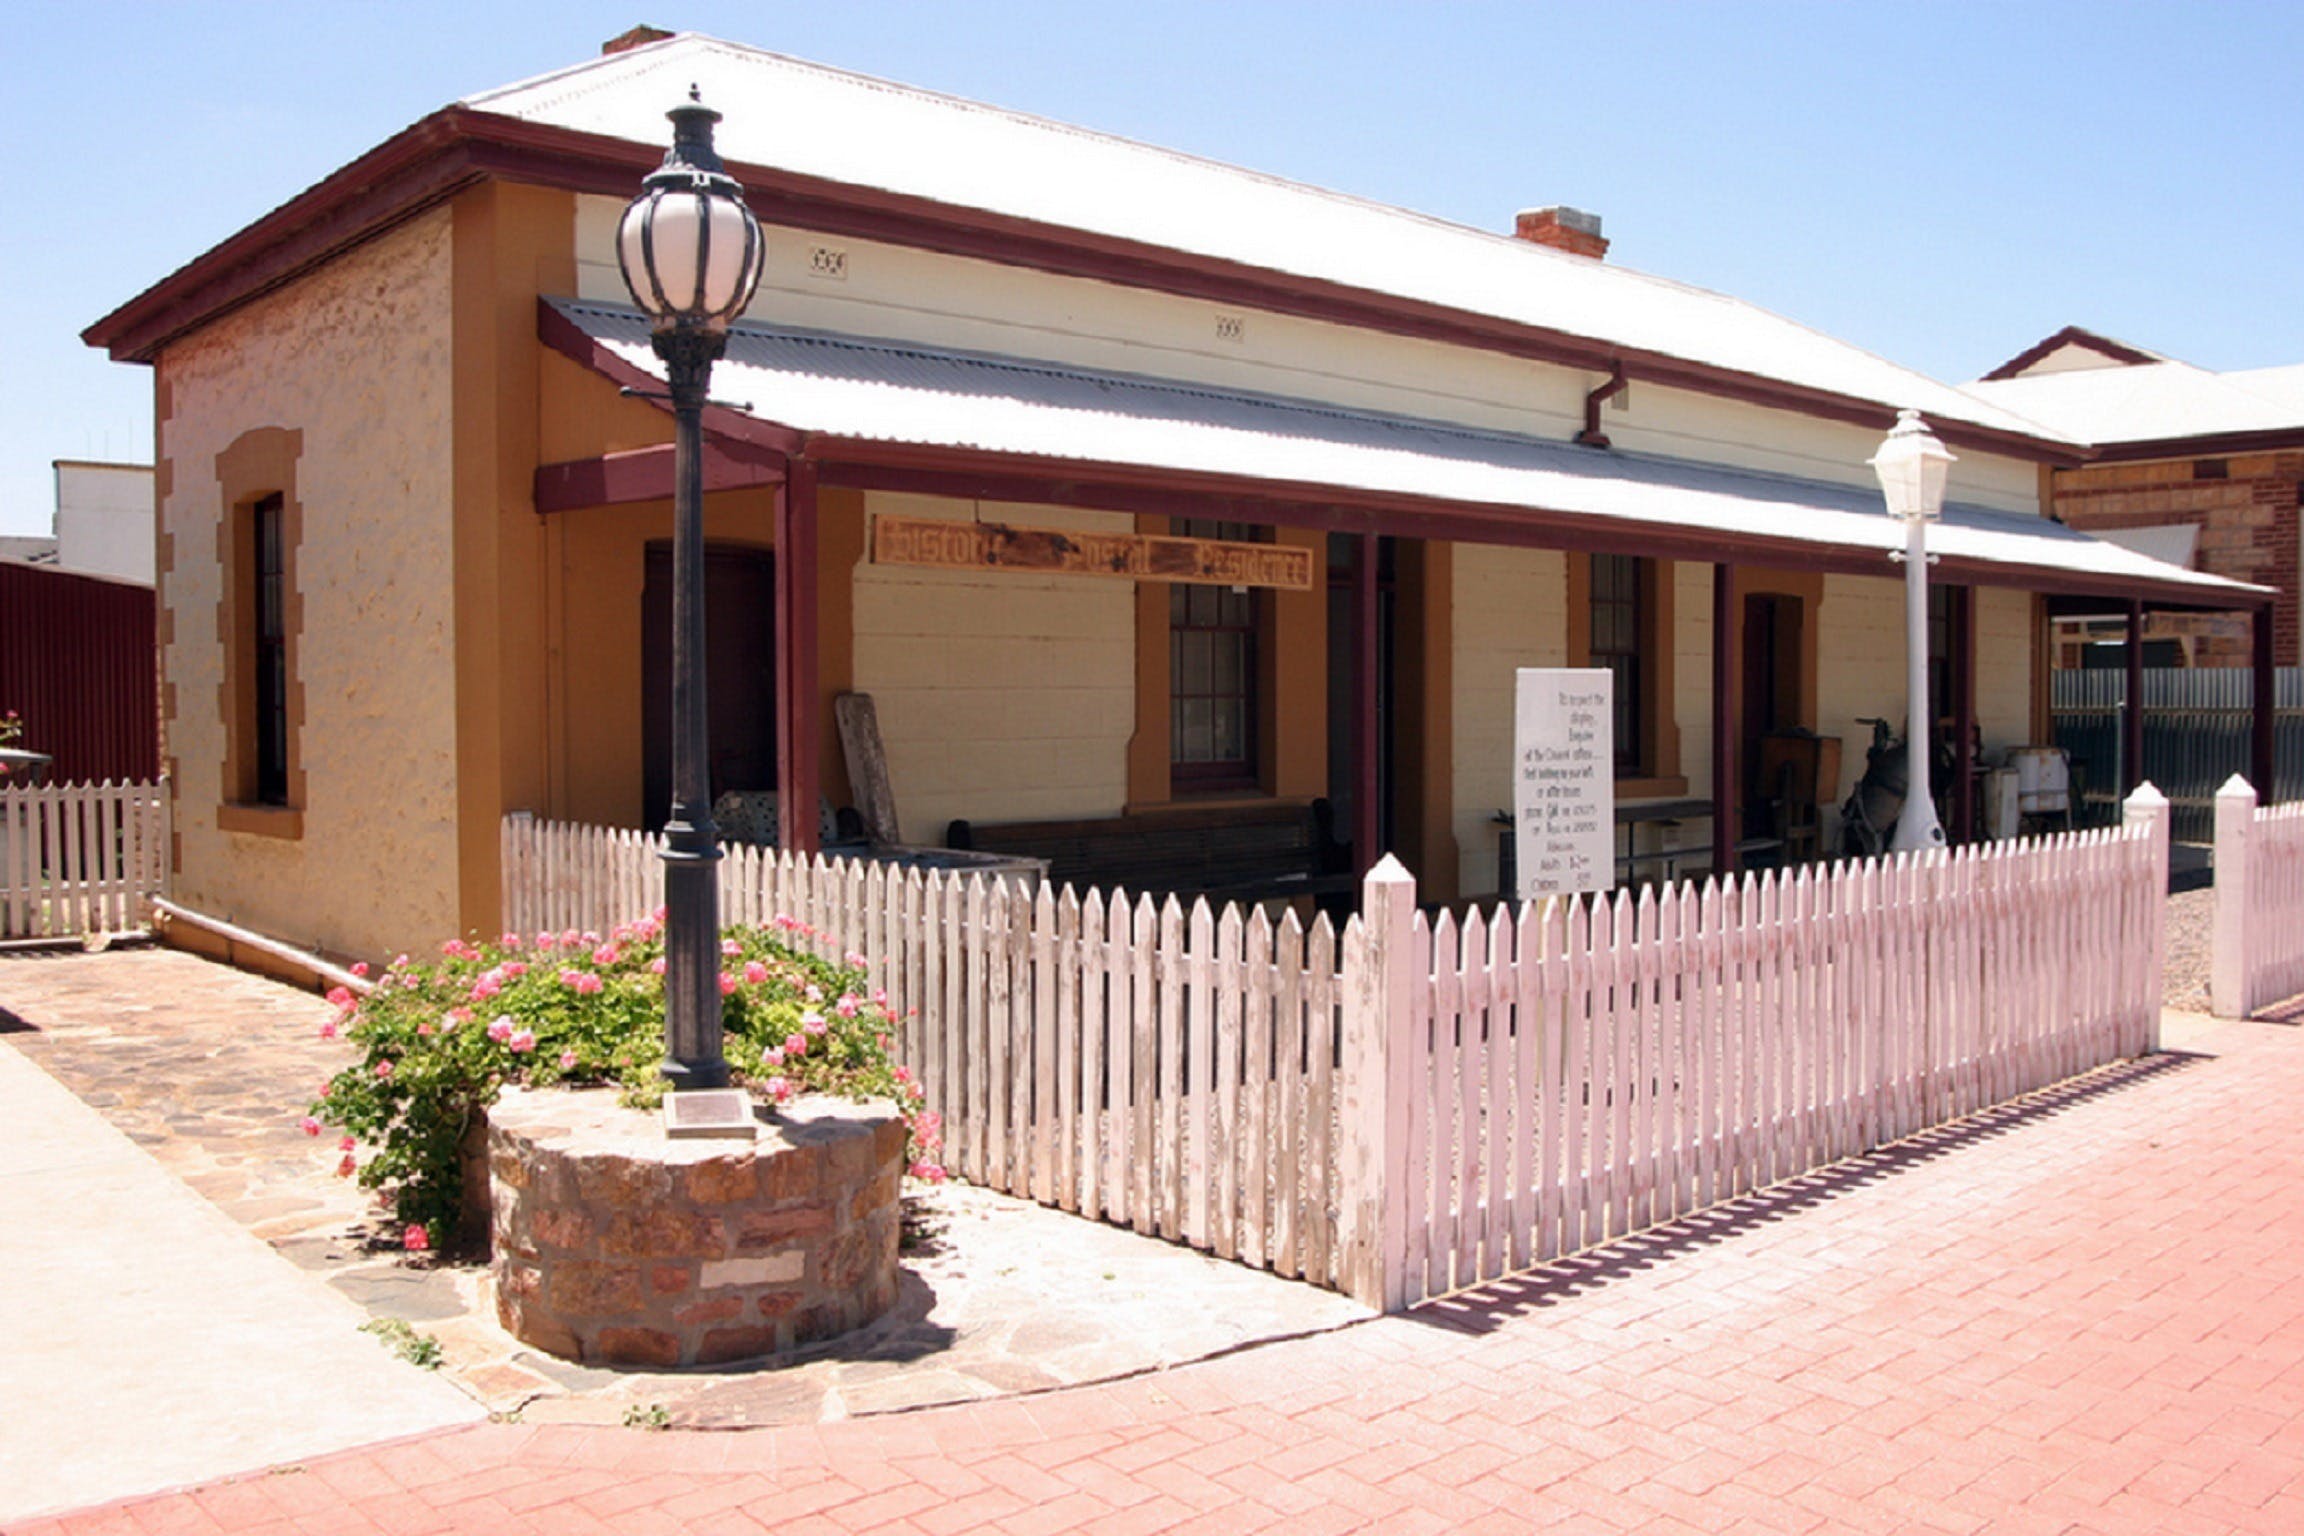 Franklin Harbour Historical Museum - Wagga Wagga Accommodation